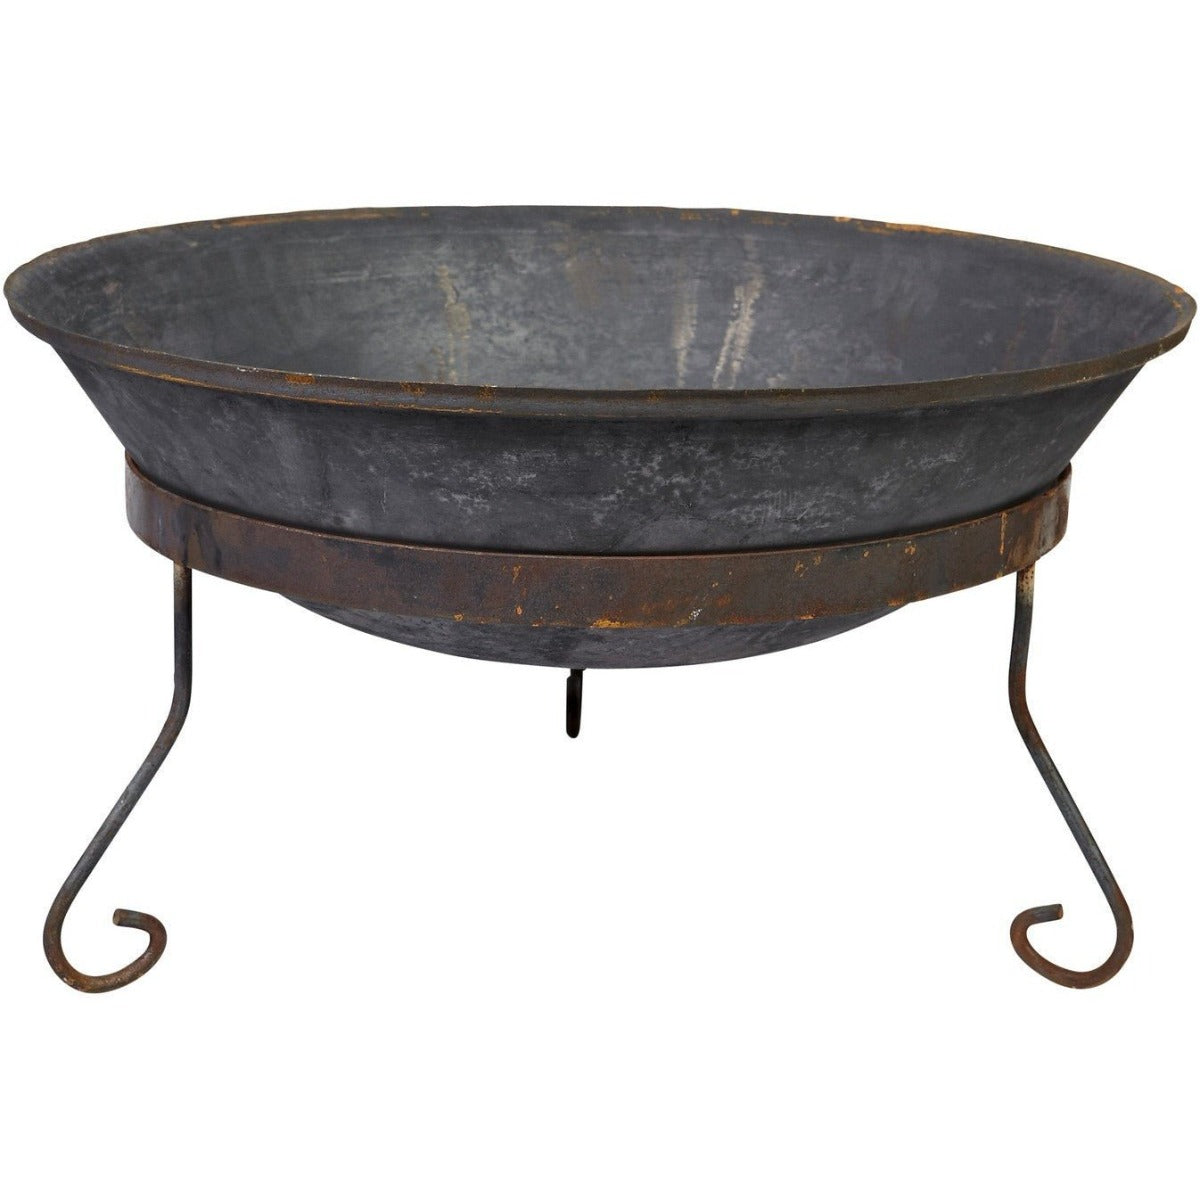 75cm Cast Iron Fire Pit Bowl with Stand - Razzino Furniture